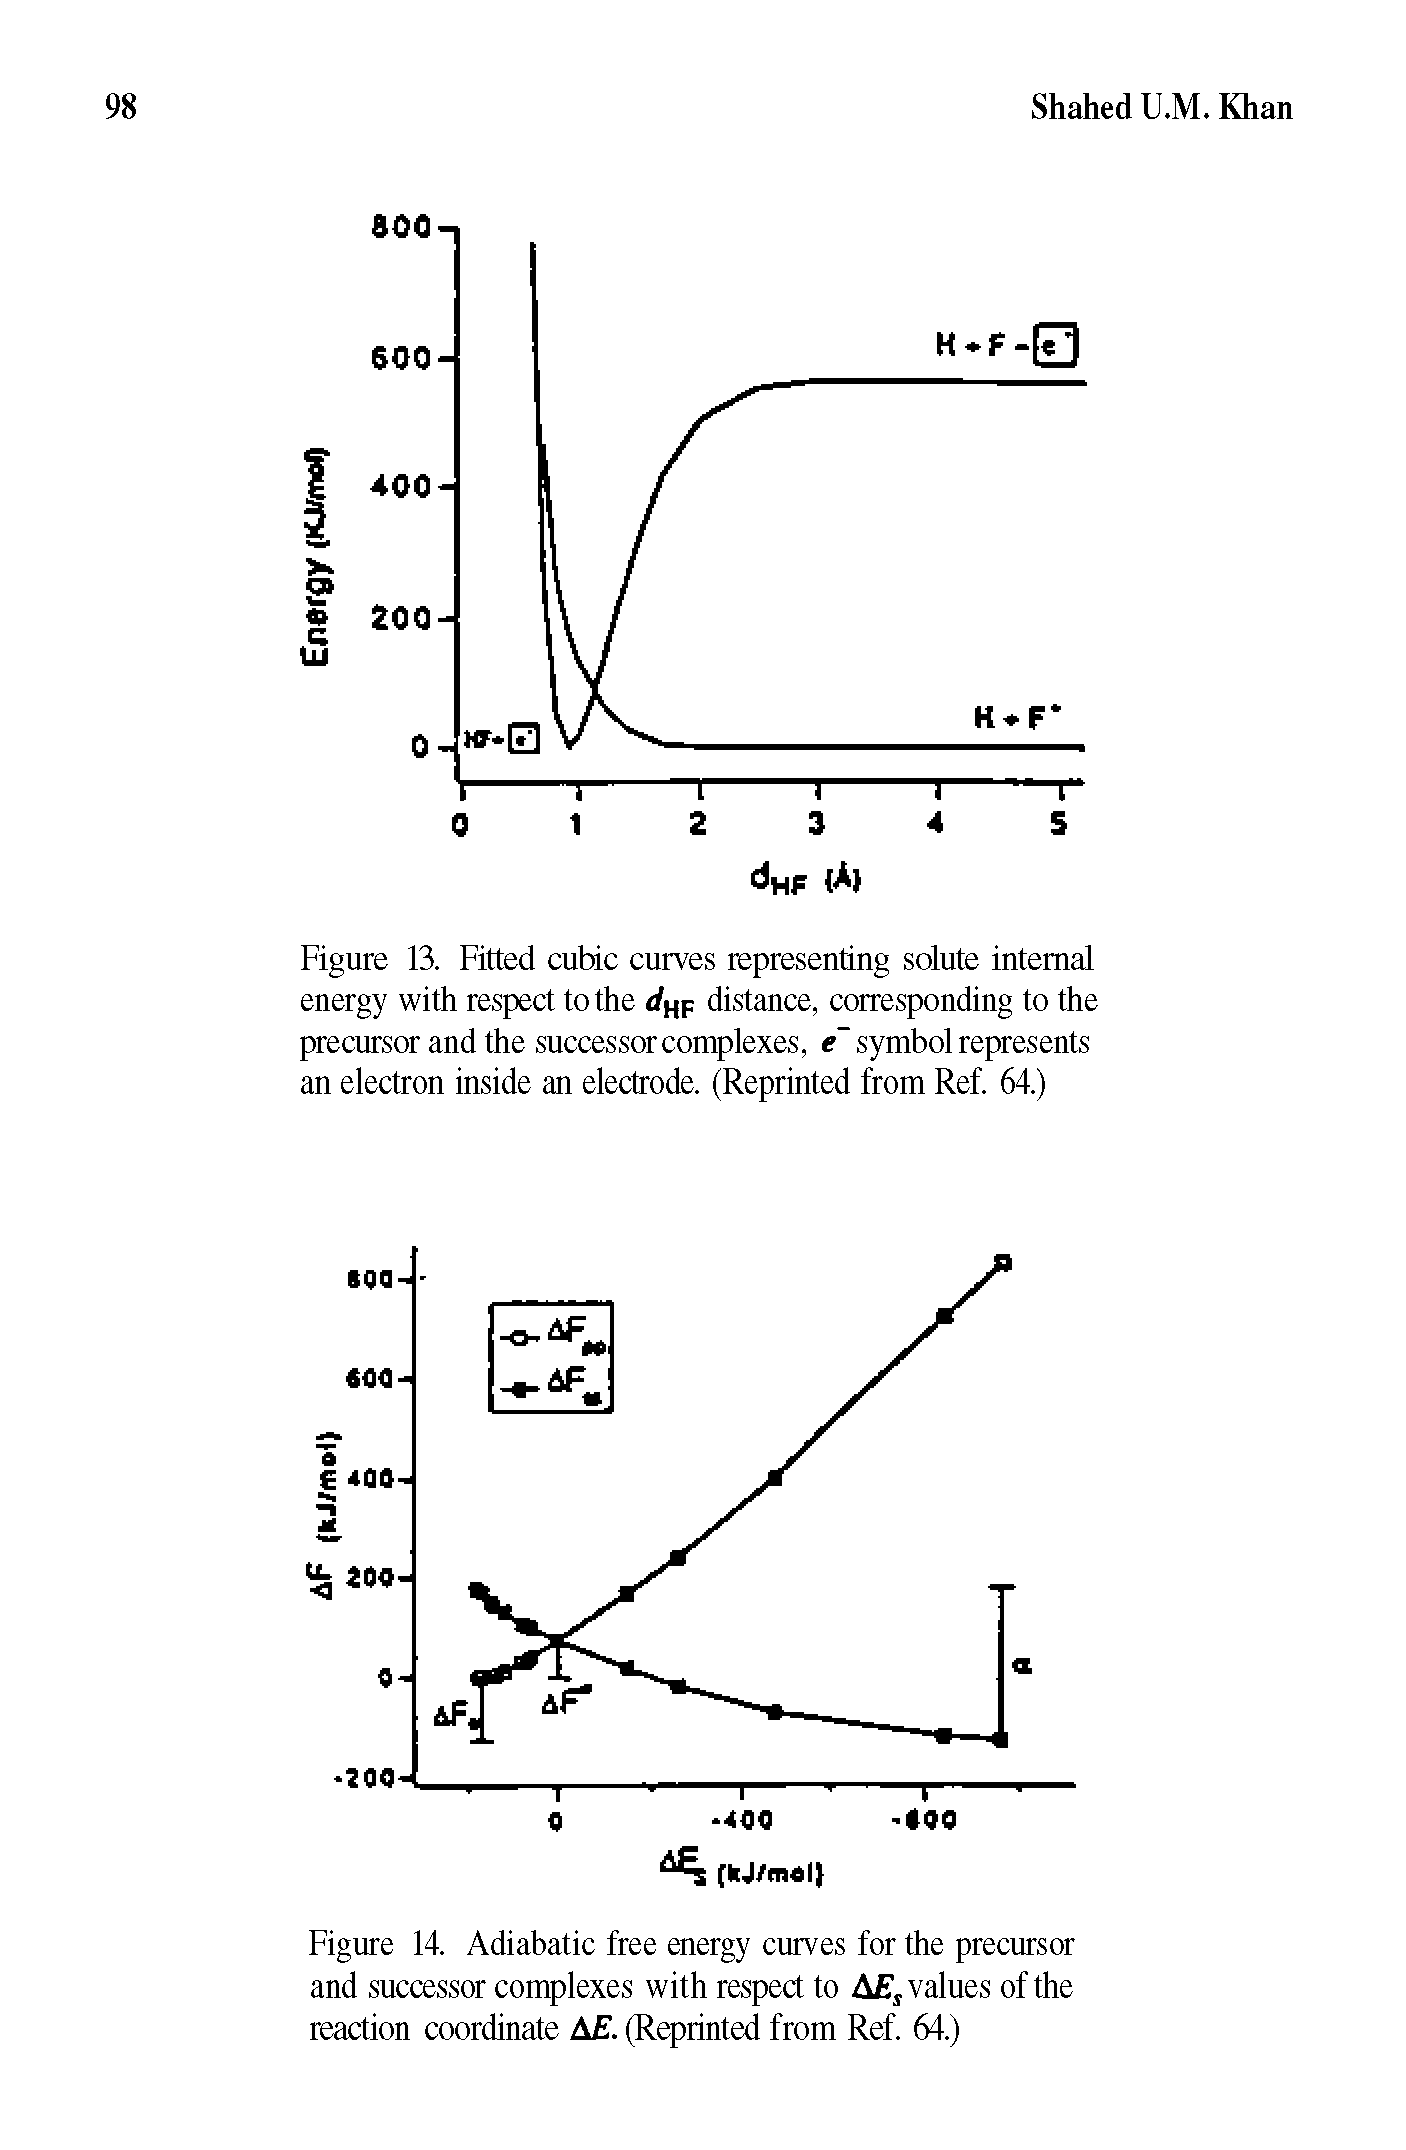 Figure 13. Fitted cubic curves representing solute internal energy with respect to the d f distance, corresponding to the precursor and the successor complexes, e symbol represents an electron inside an electrode. (Reprinted from Ref. 64.)...